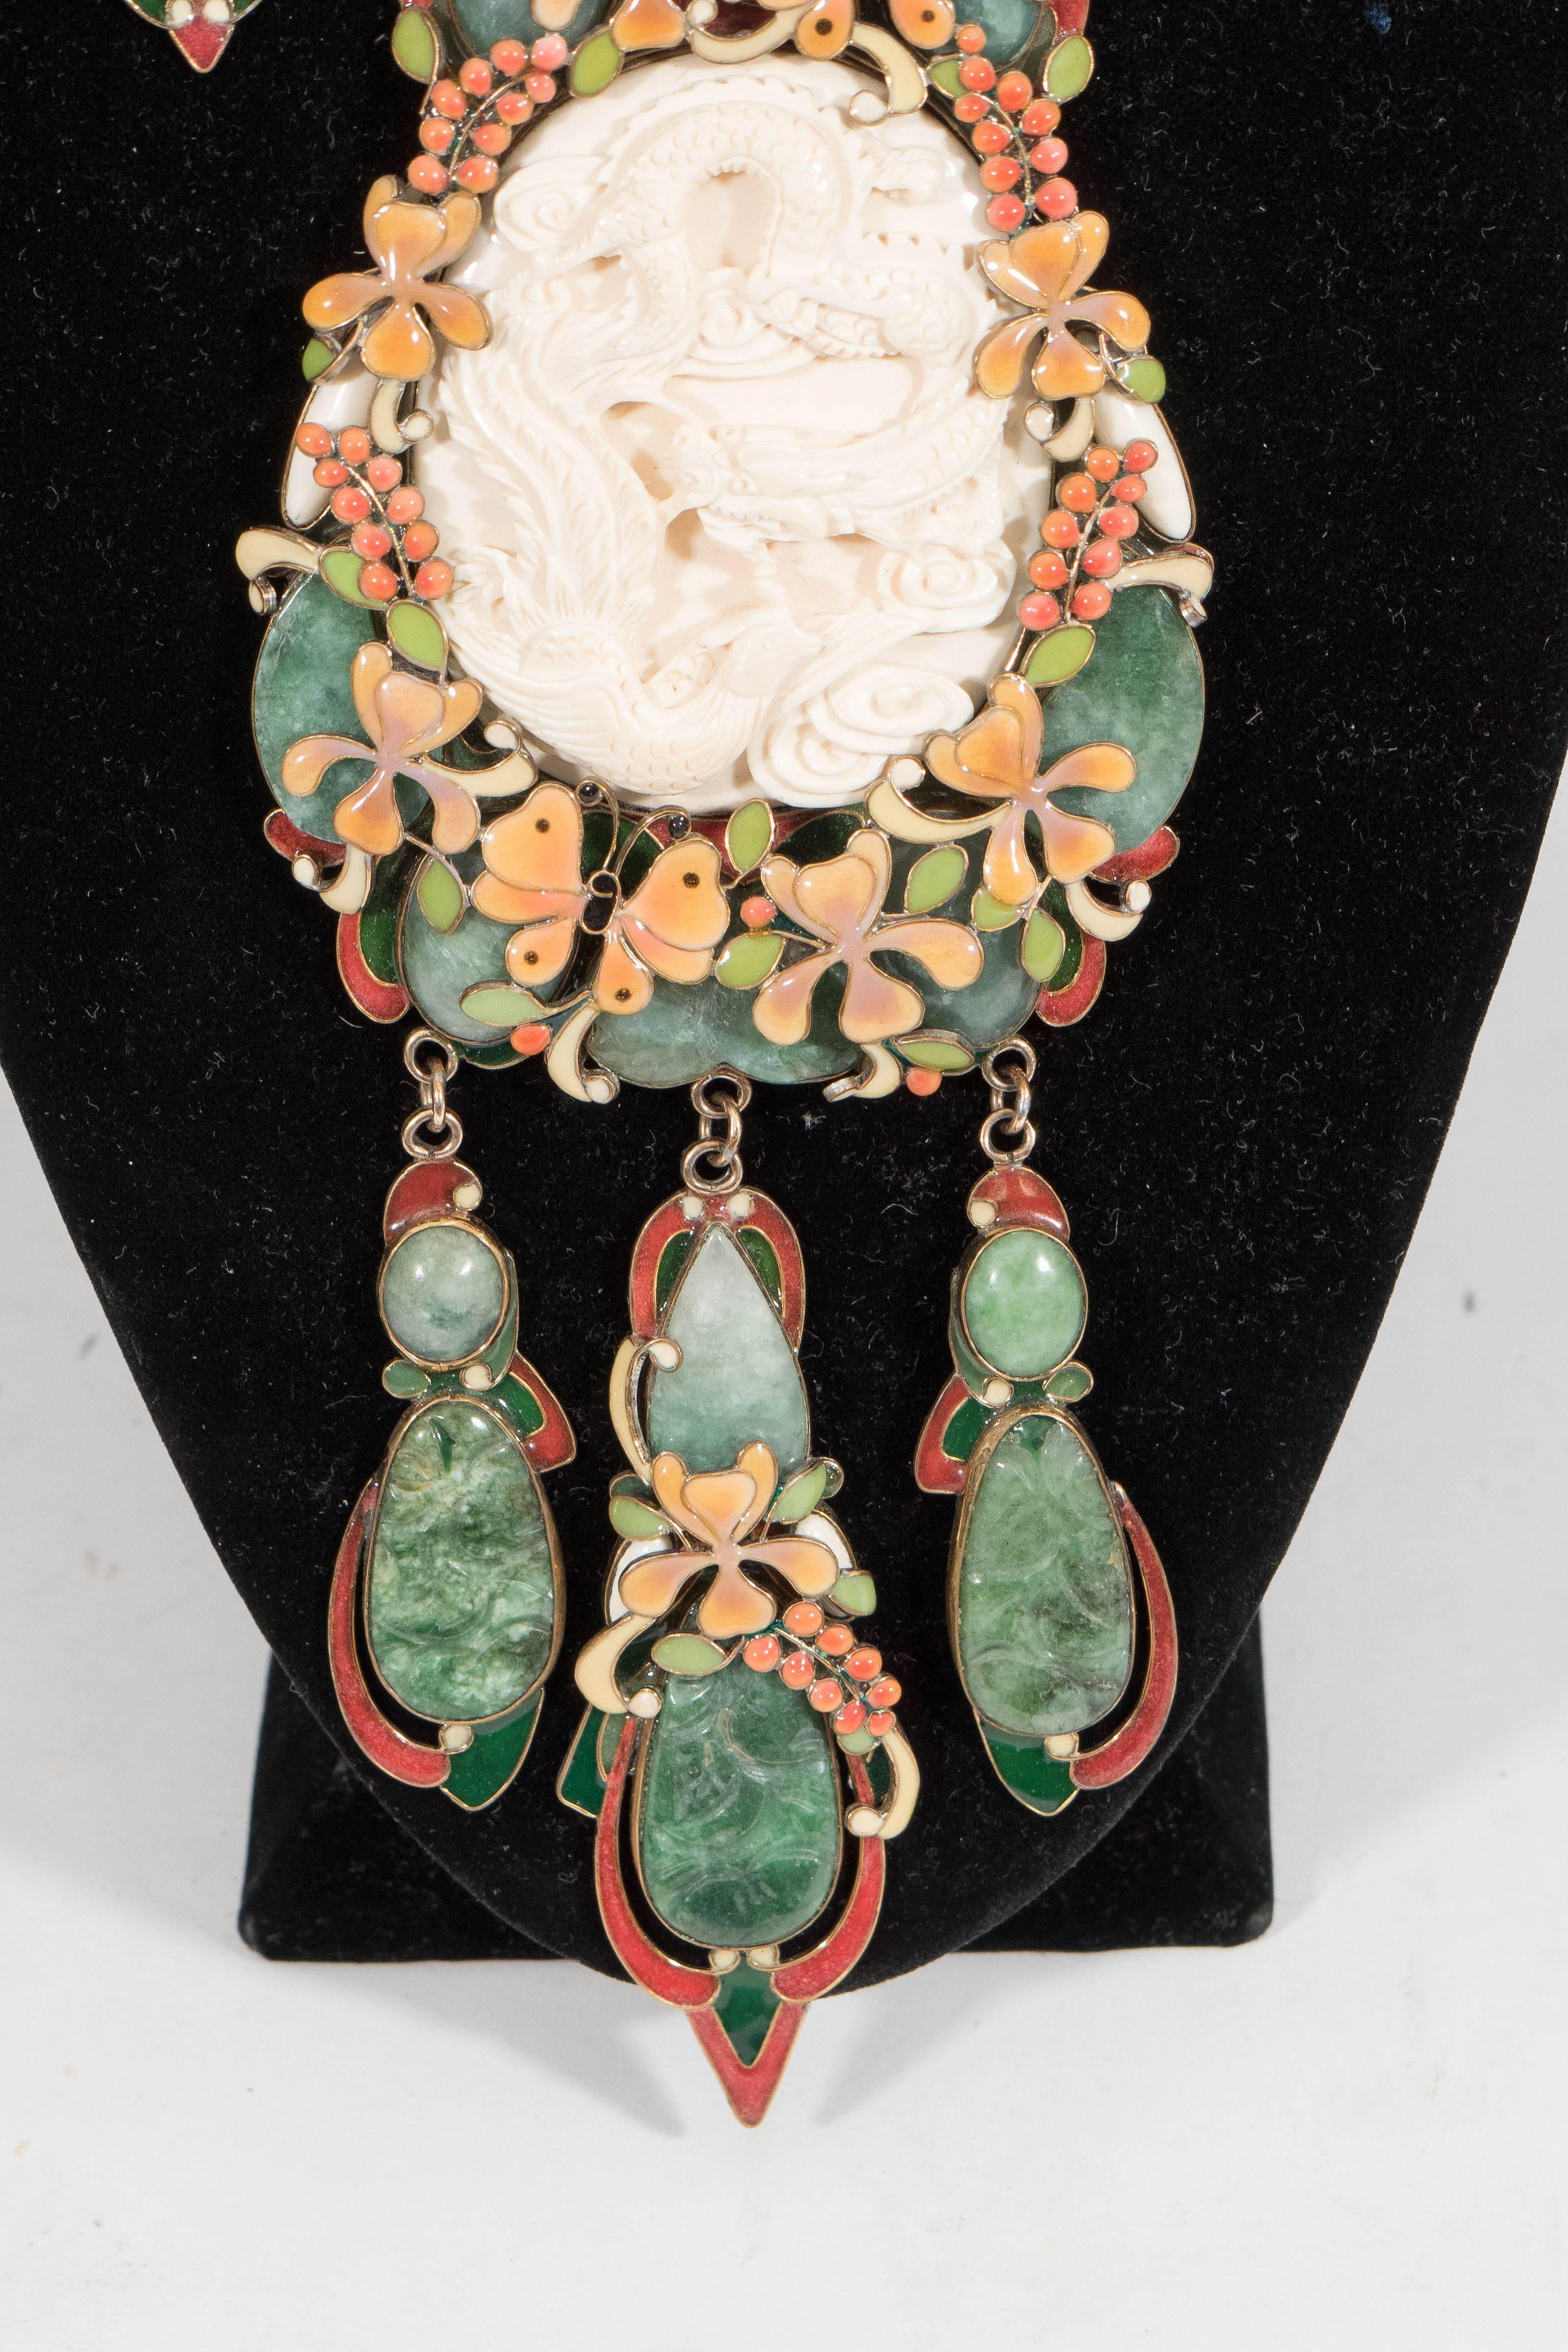 A one of a kind, circa 1970s vintage jewelry suite, which includes a stunning lavalier necklace, matching cuff bracelet, ring and earrings, crafted and designed by California jewelry artisan Vega Maddux (otherwise Vega Maddox), notable for her